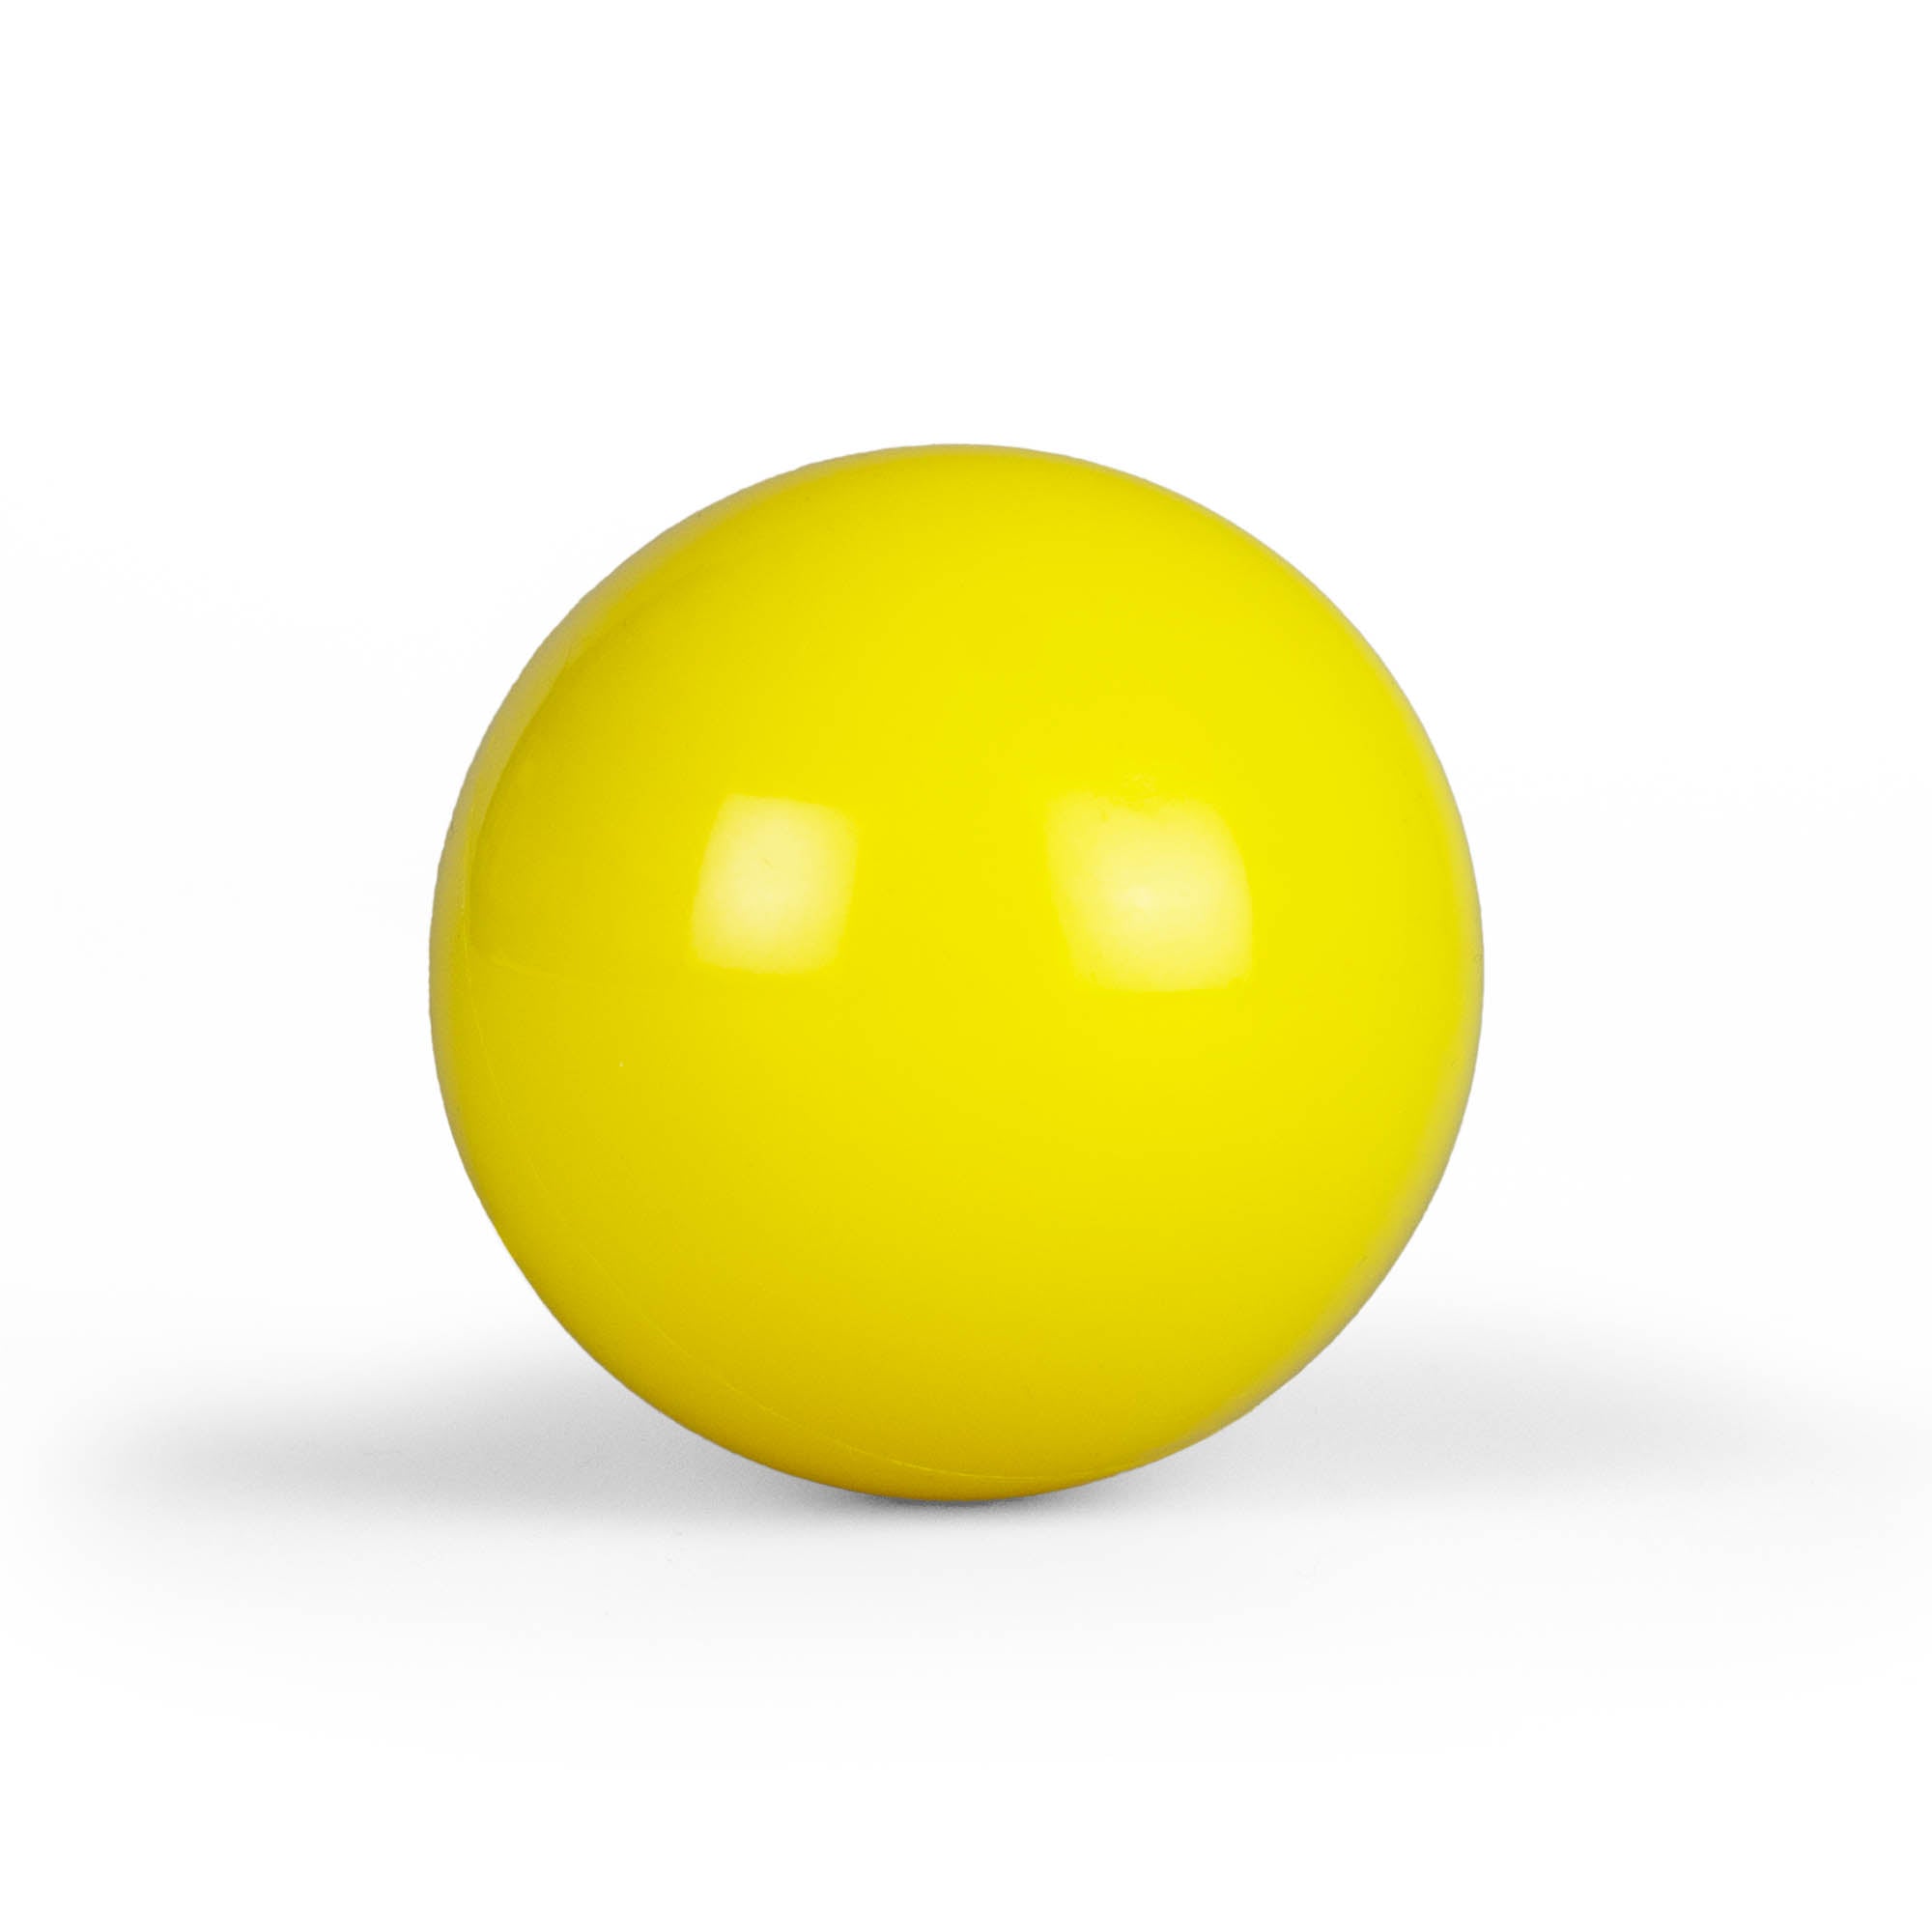 Mr babache 100mm stage ball yellow straight on white background